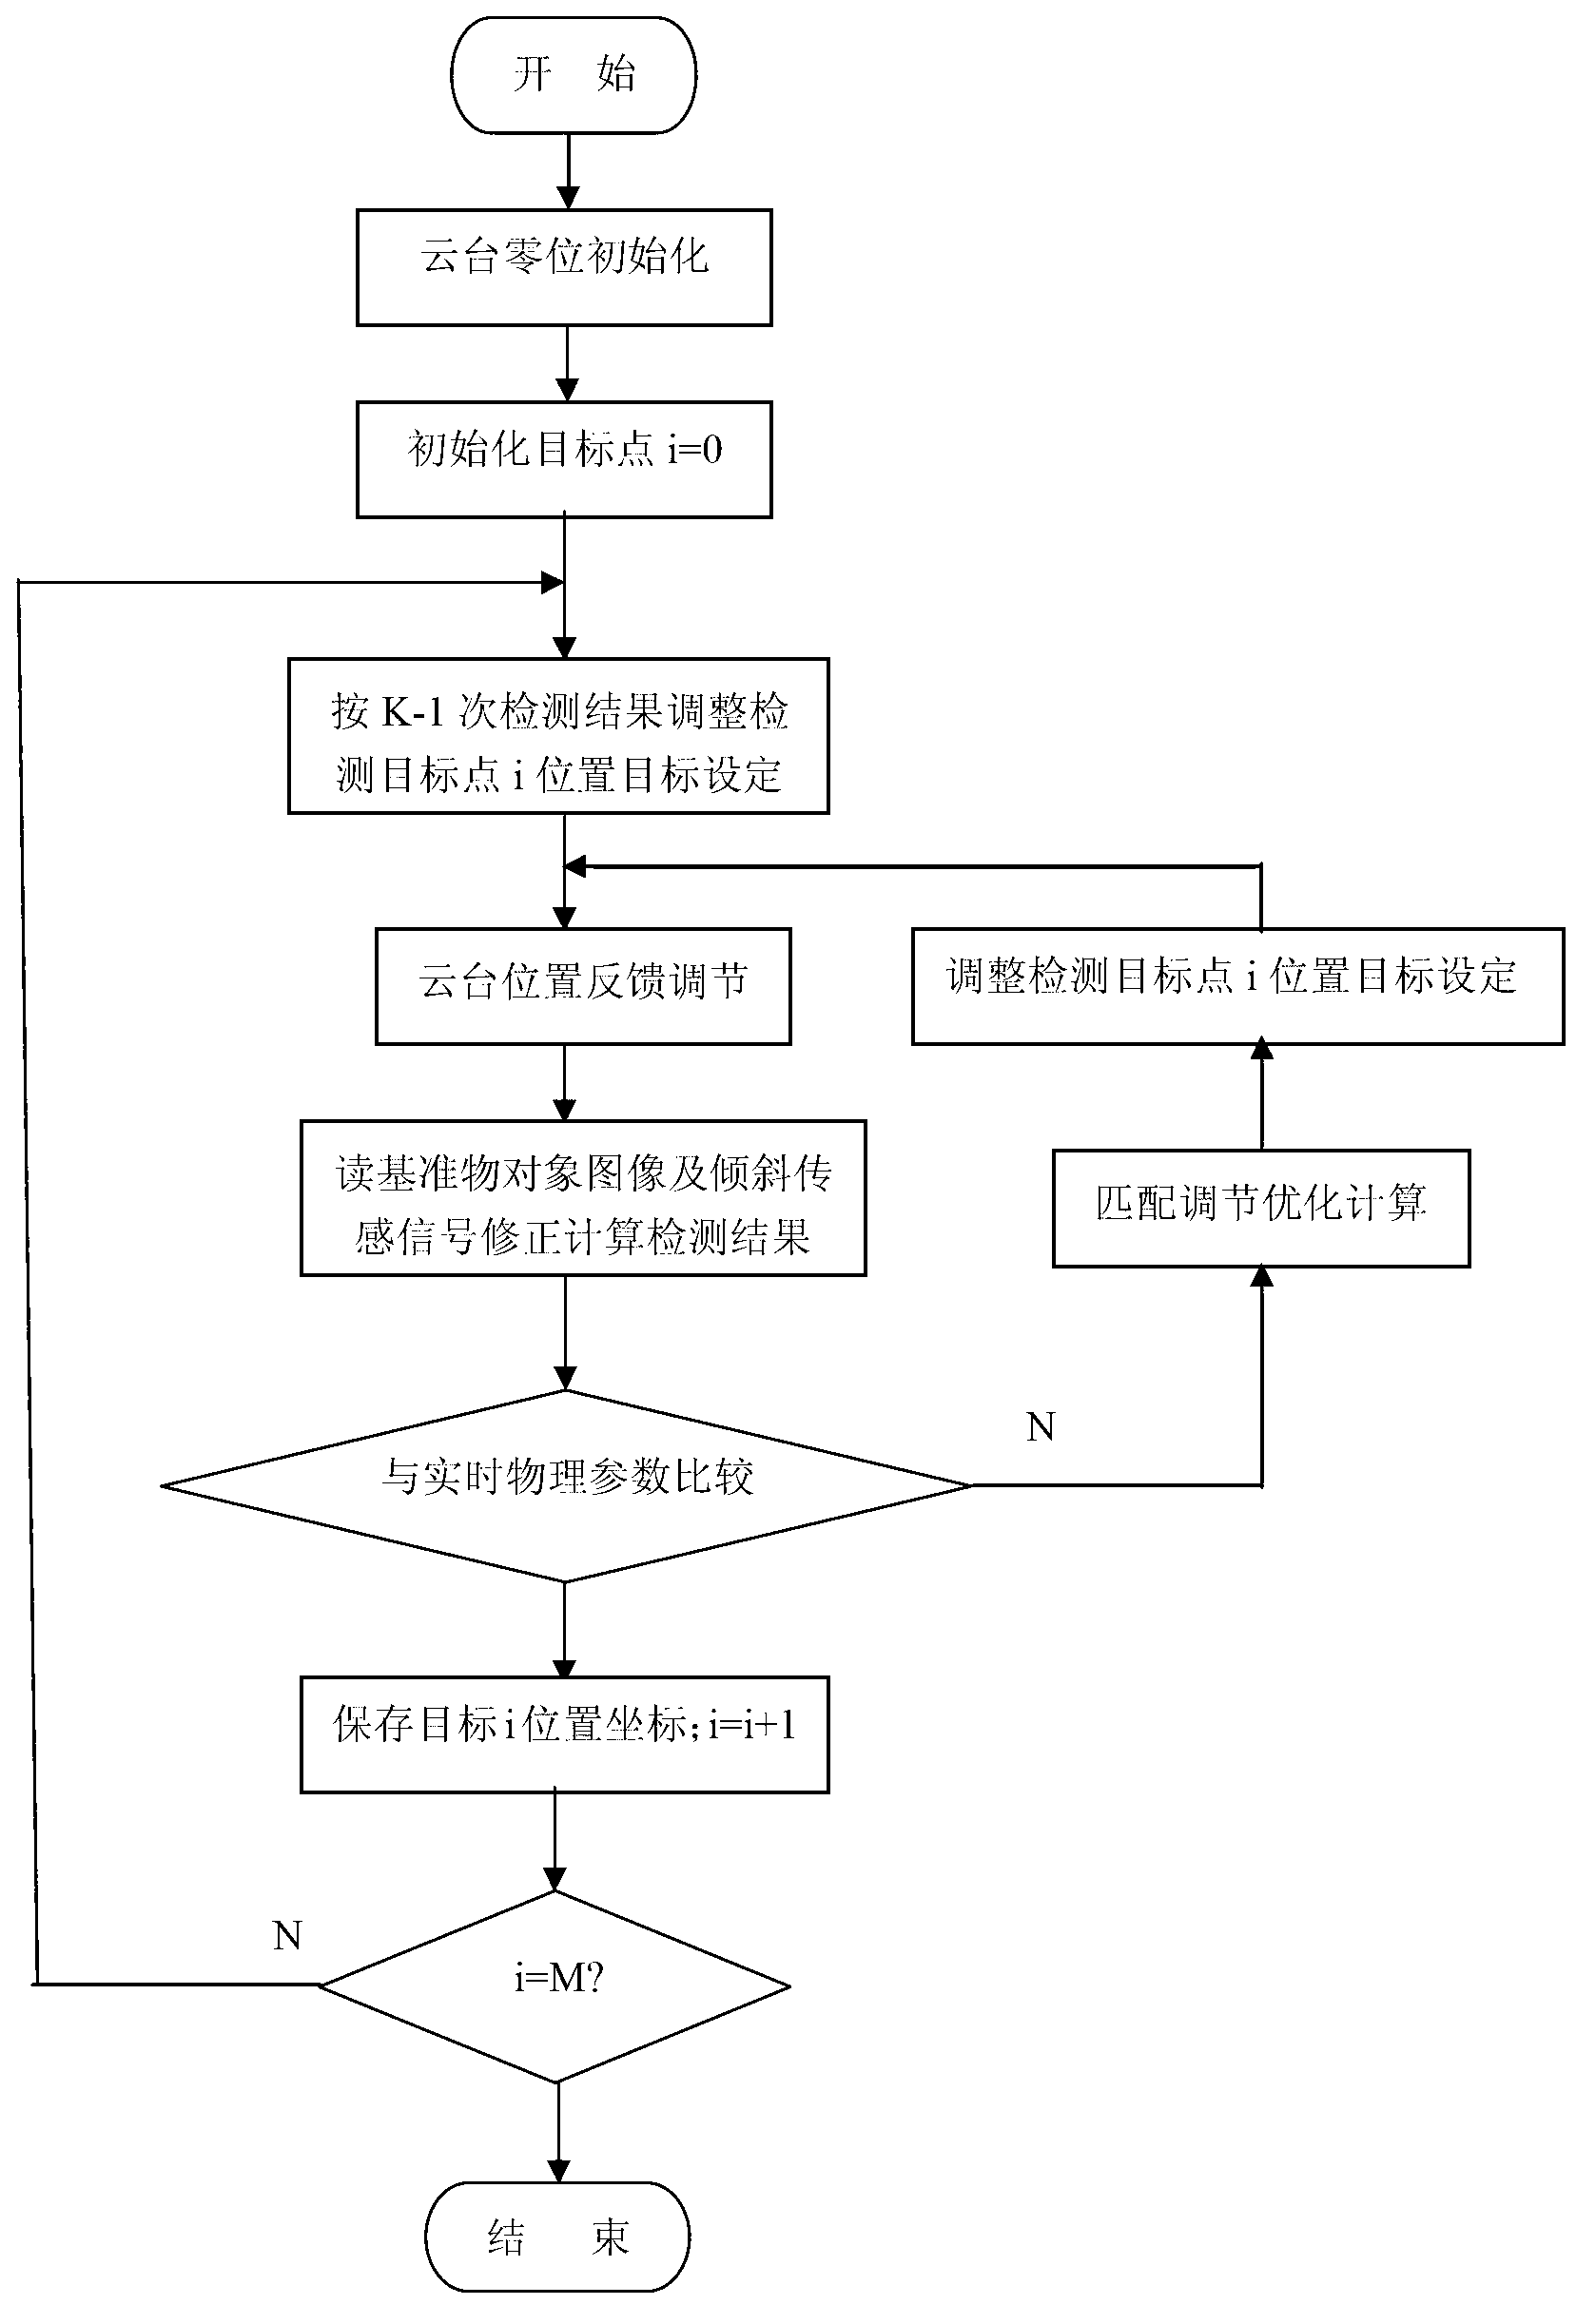 Real-time multi-target position detection method and system based on image